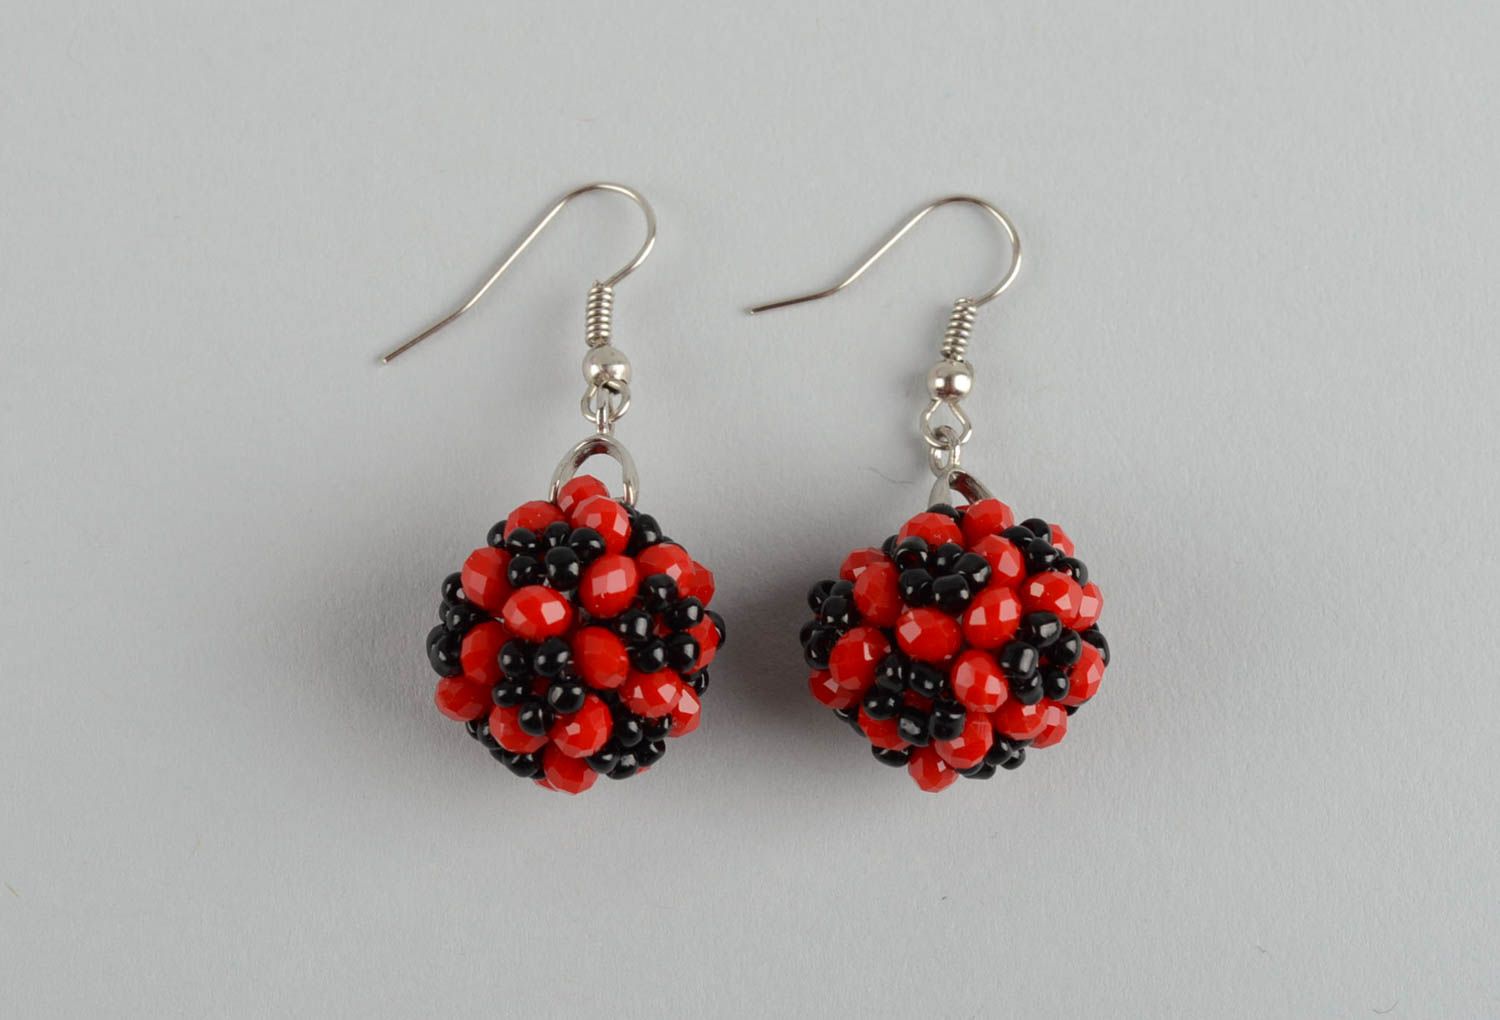 Handmade earrings beaded jewelry cool earrings fashion accessories gifts for her photo 2